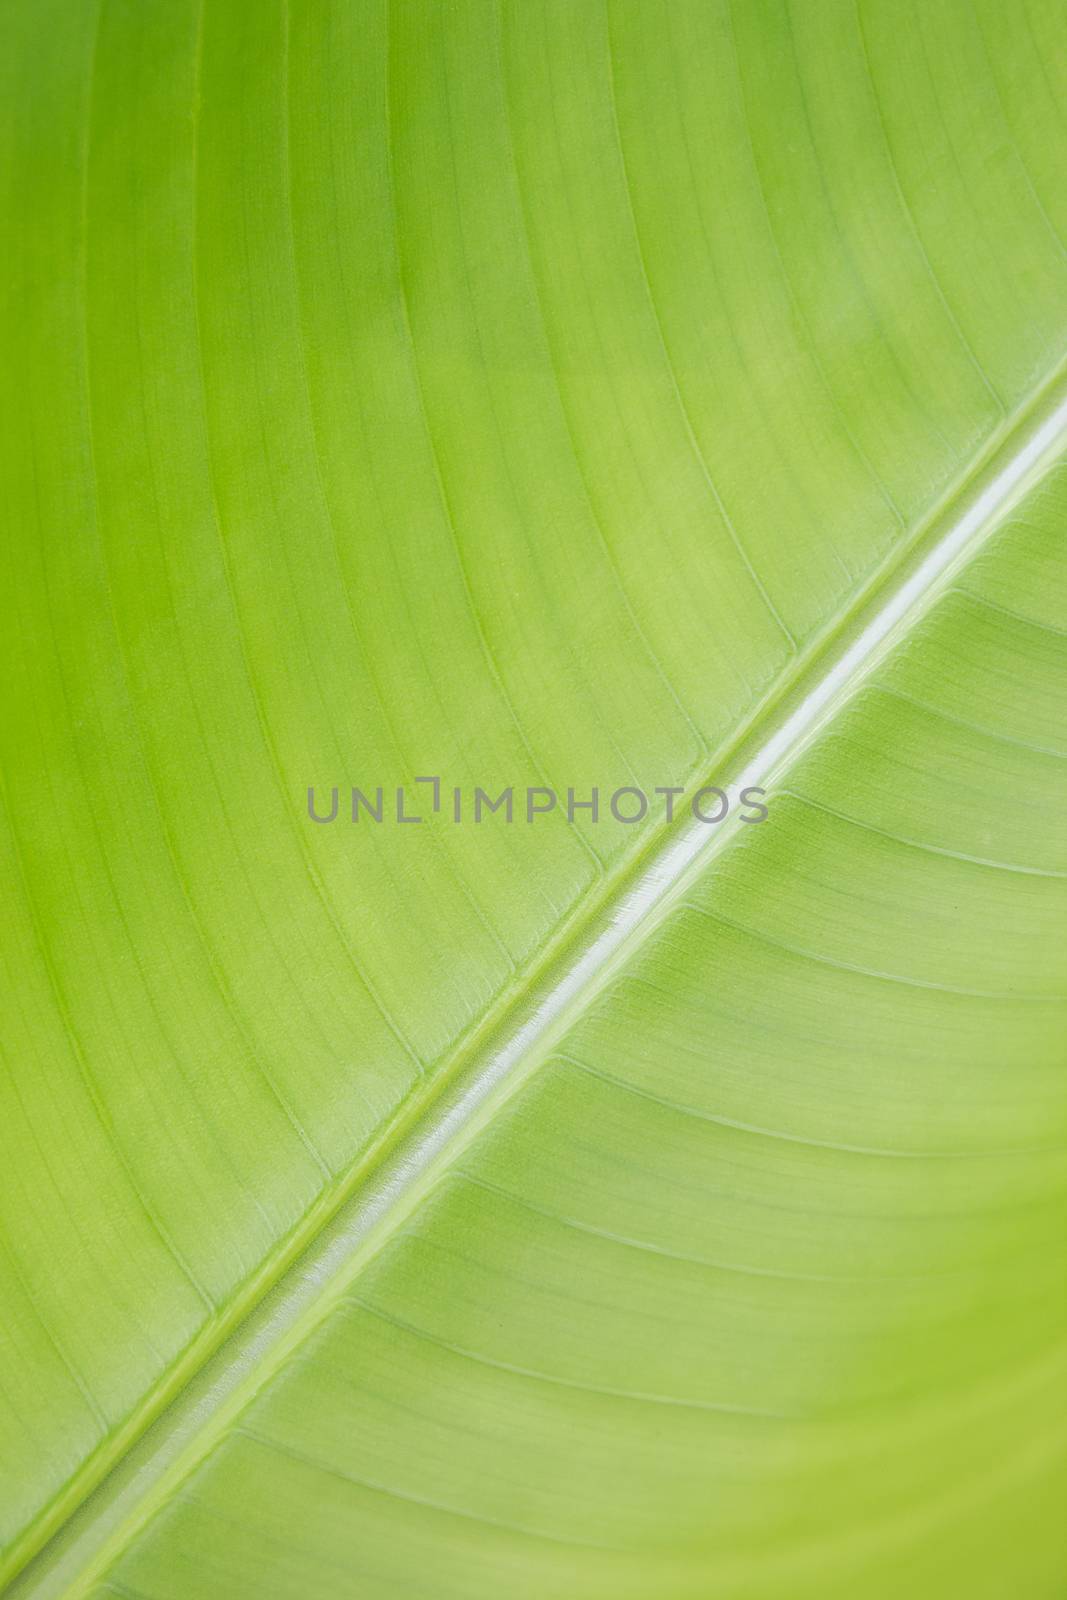 Abstract striped nature background, Details of Heliconia leaf, l by rakoptonLPN